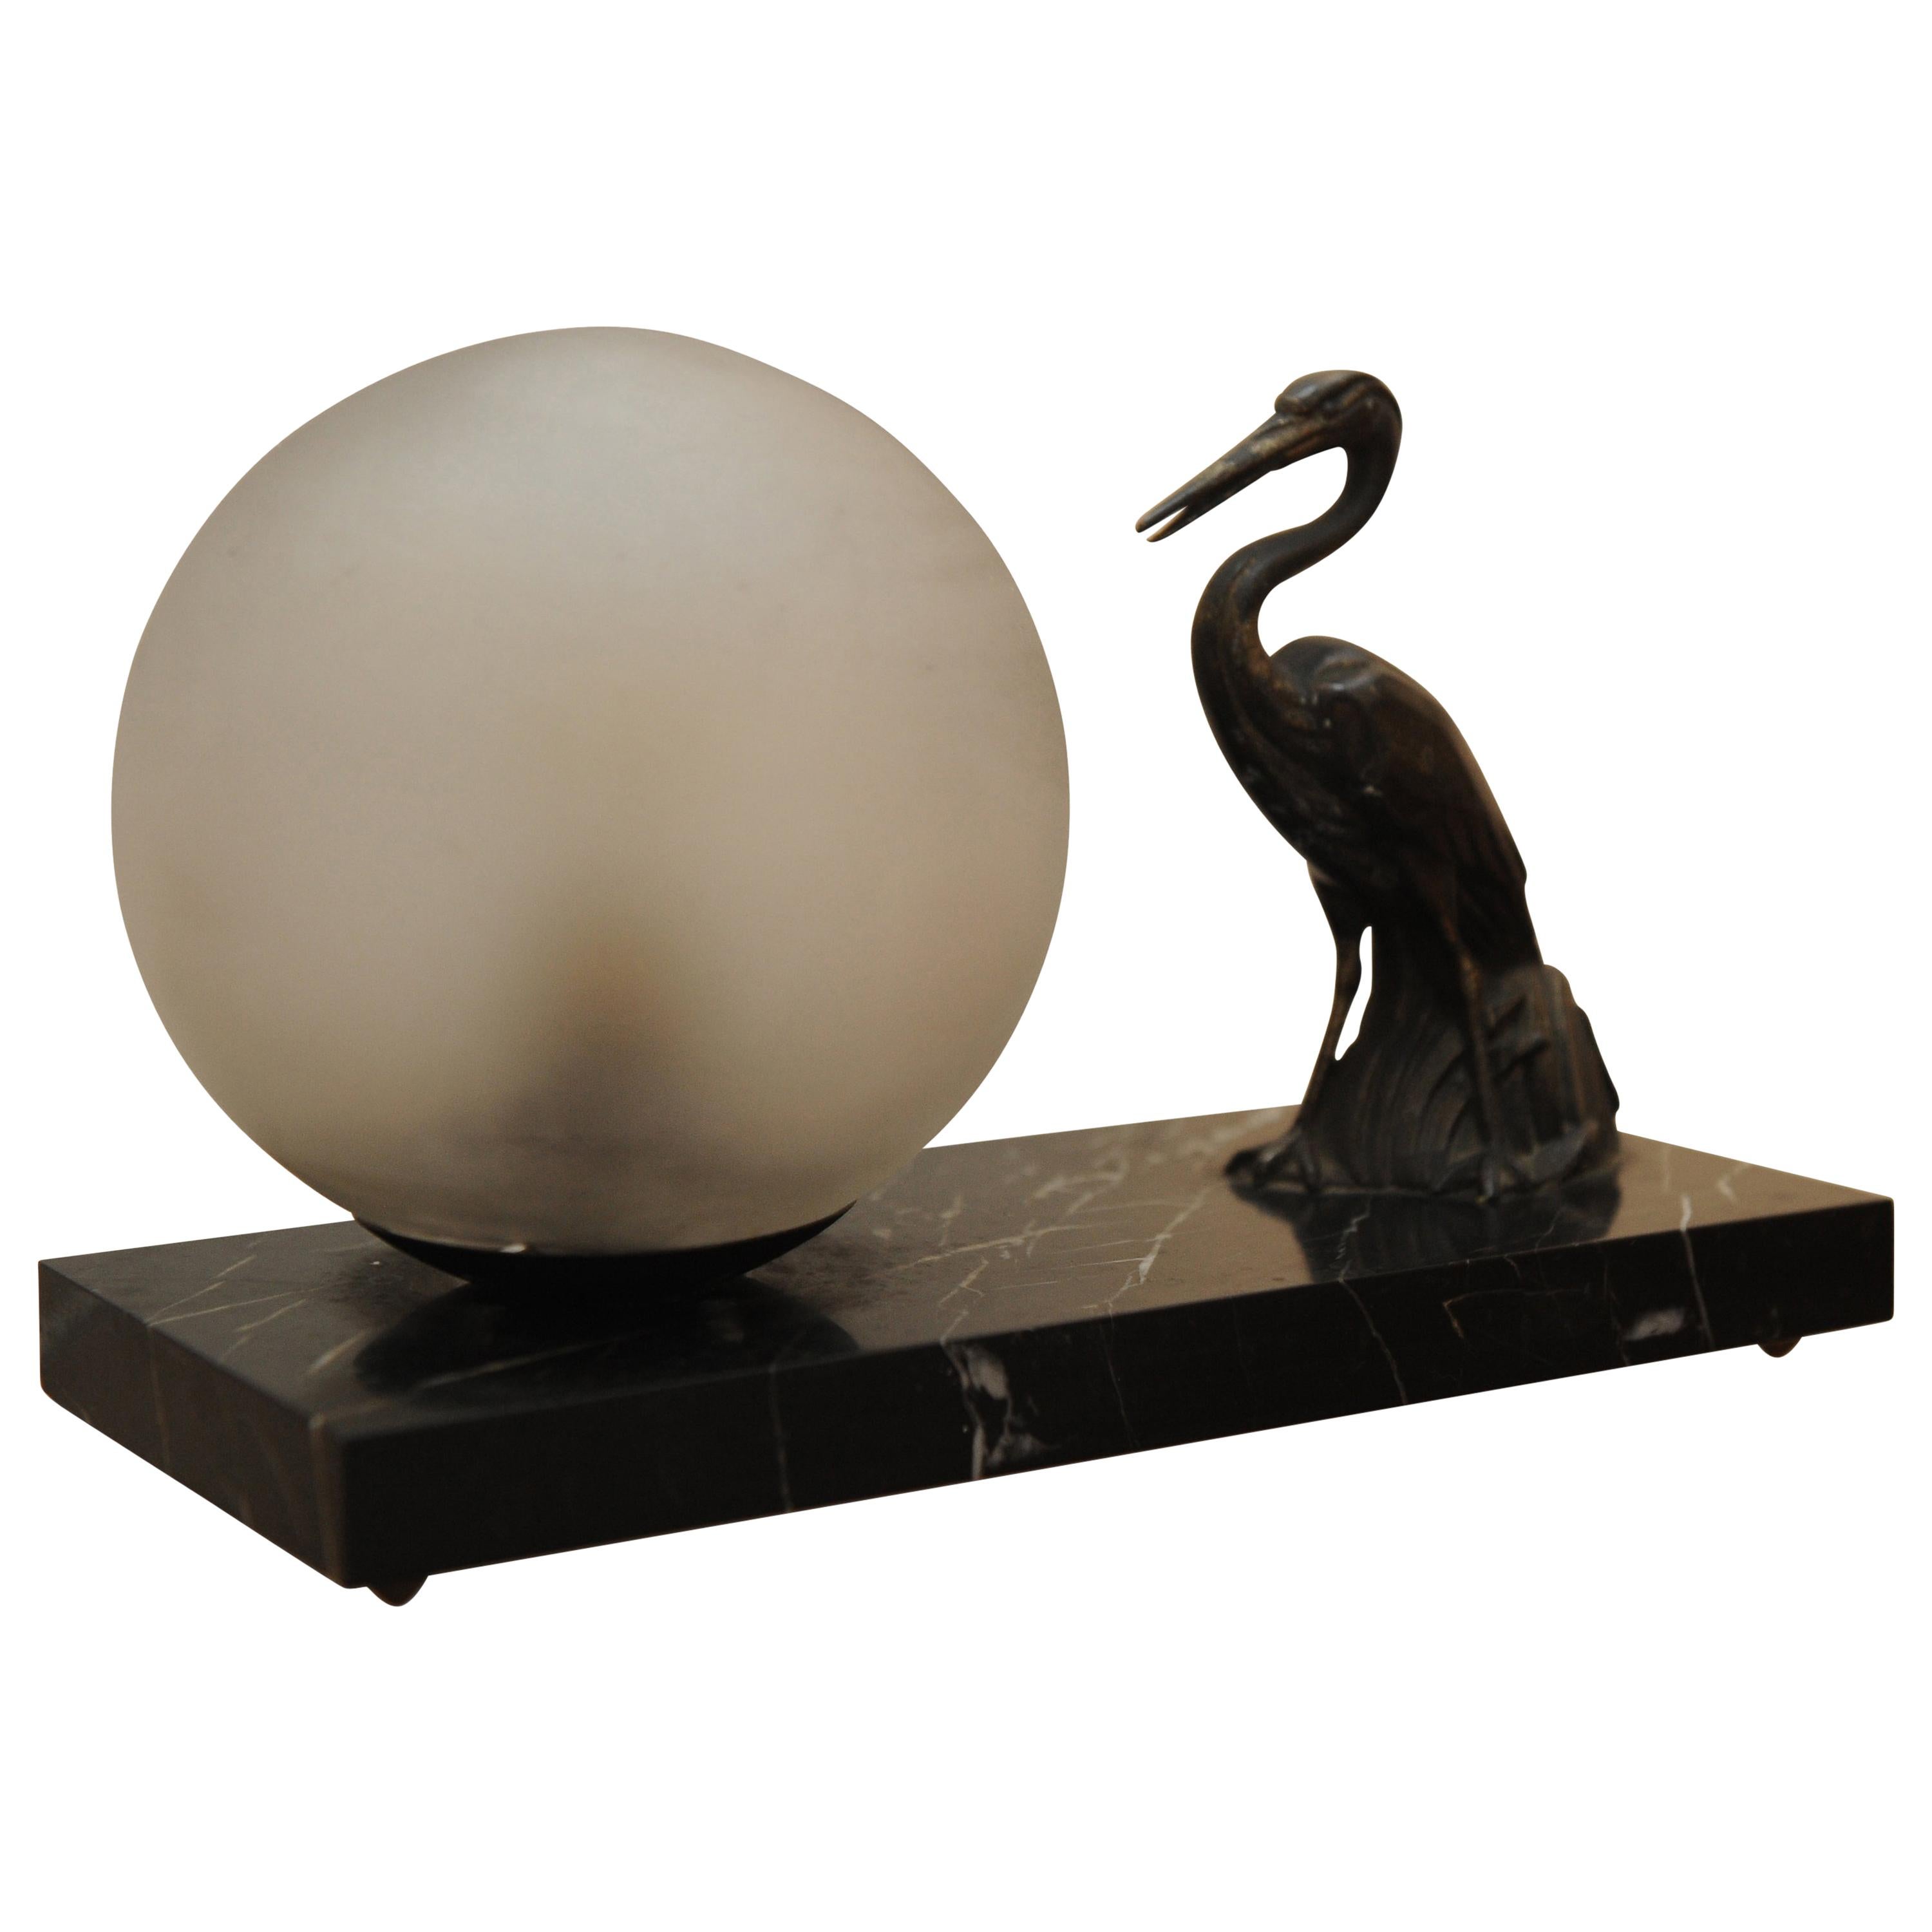 1930s Art Deco Table Lamp Spelter Sculpture of a Heron, a Glass Globe on Marble For Sale